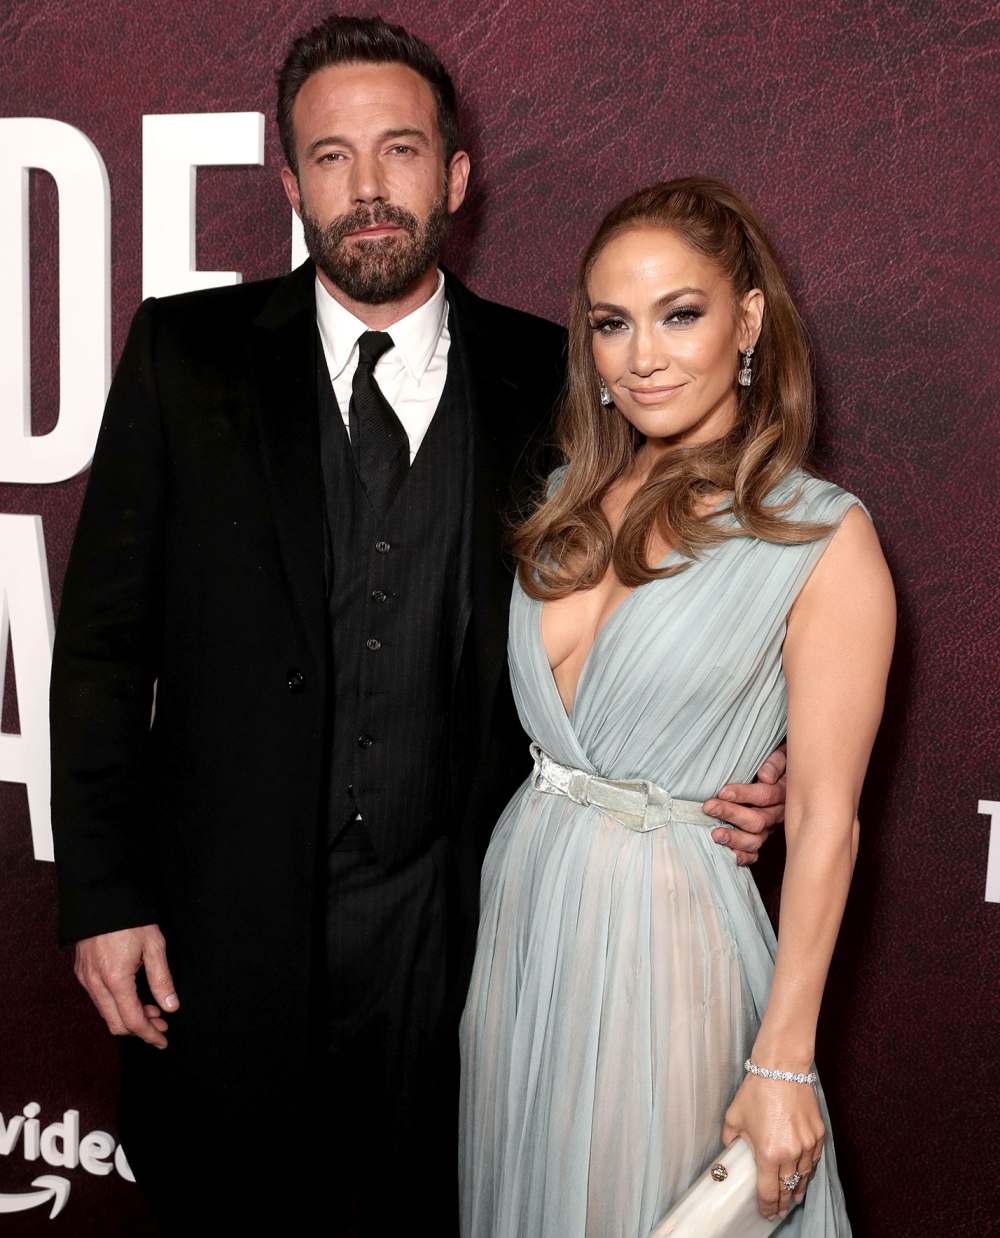 Jennifer Lopez Previously Hinted at Wanting to Take Ben Affleck's Last Name in 2003